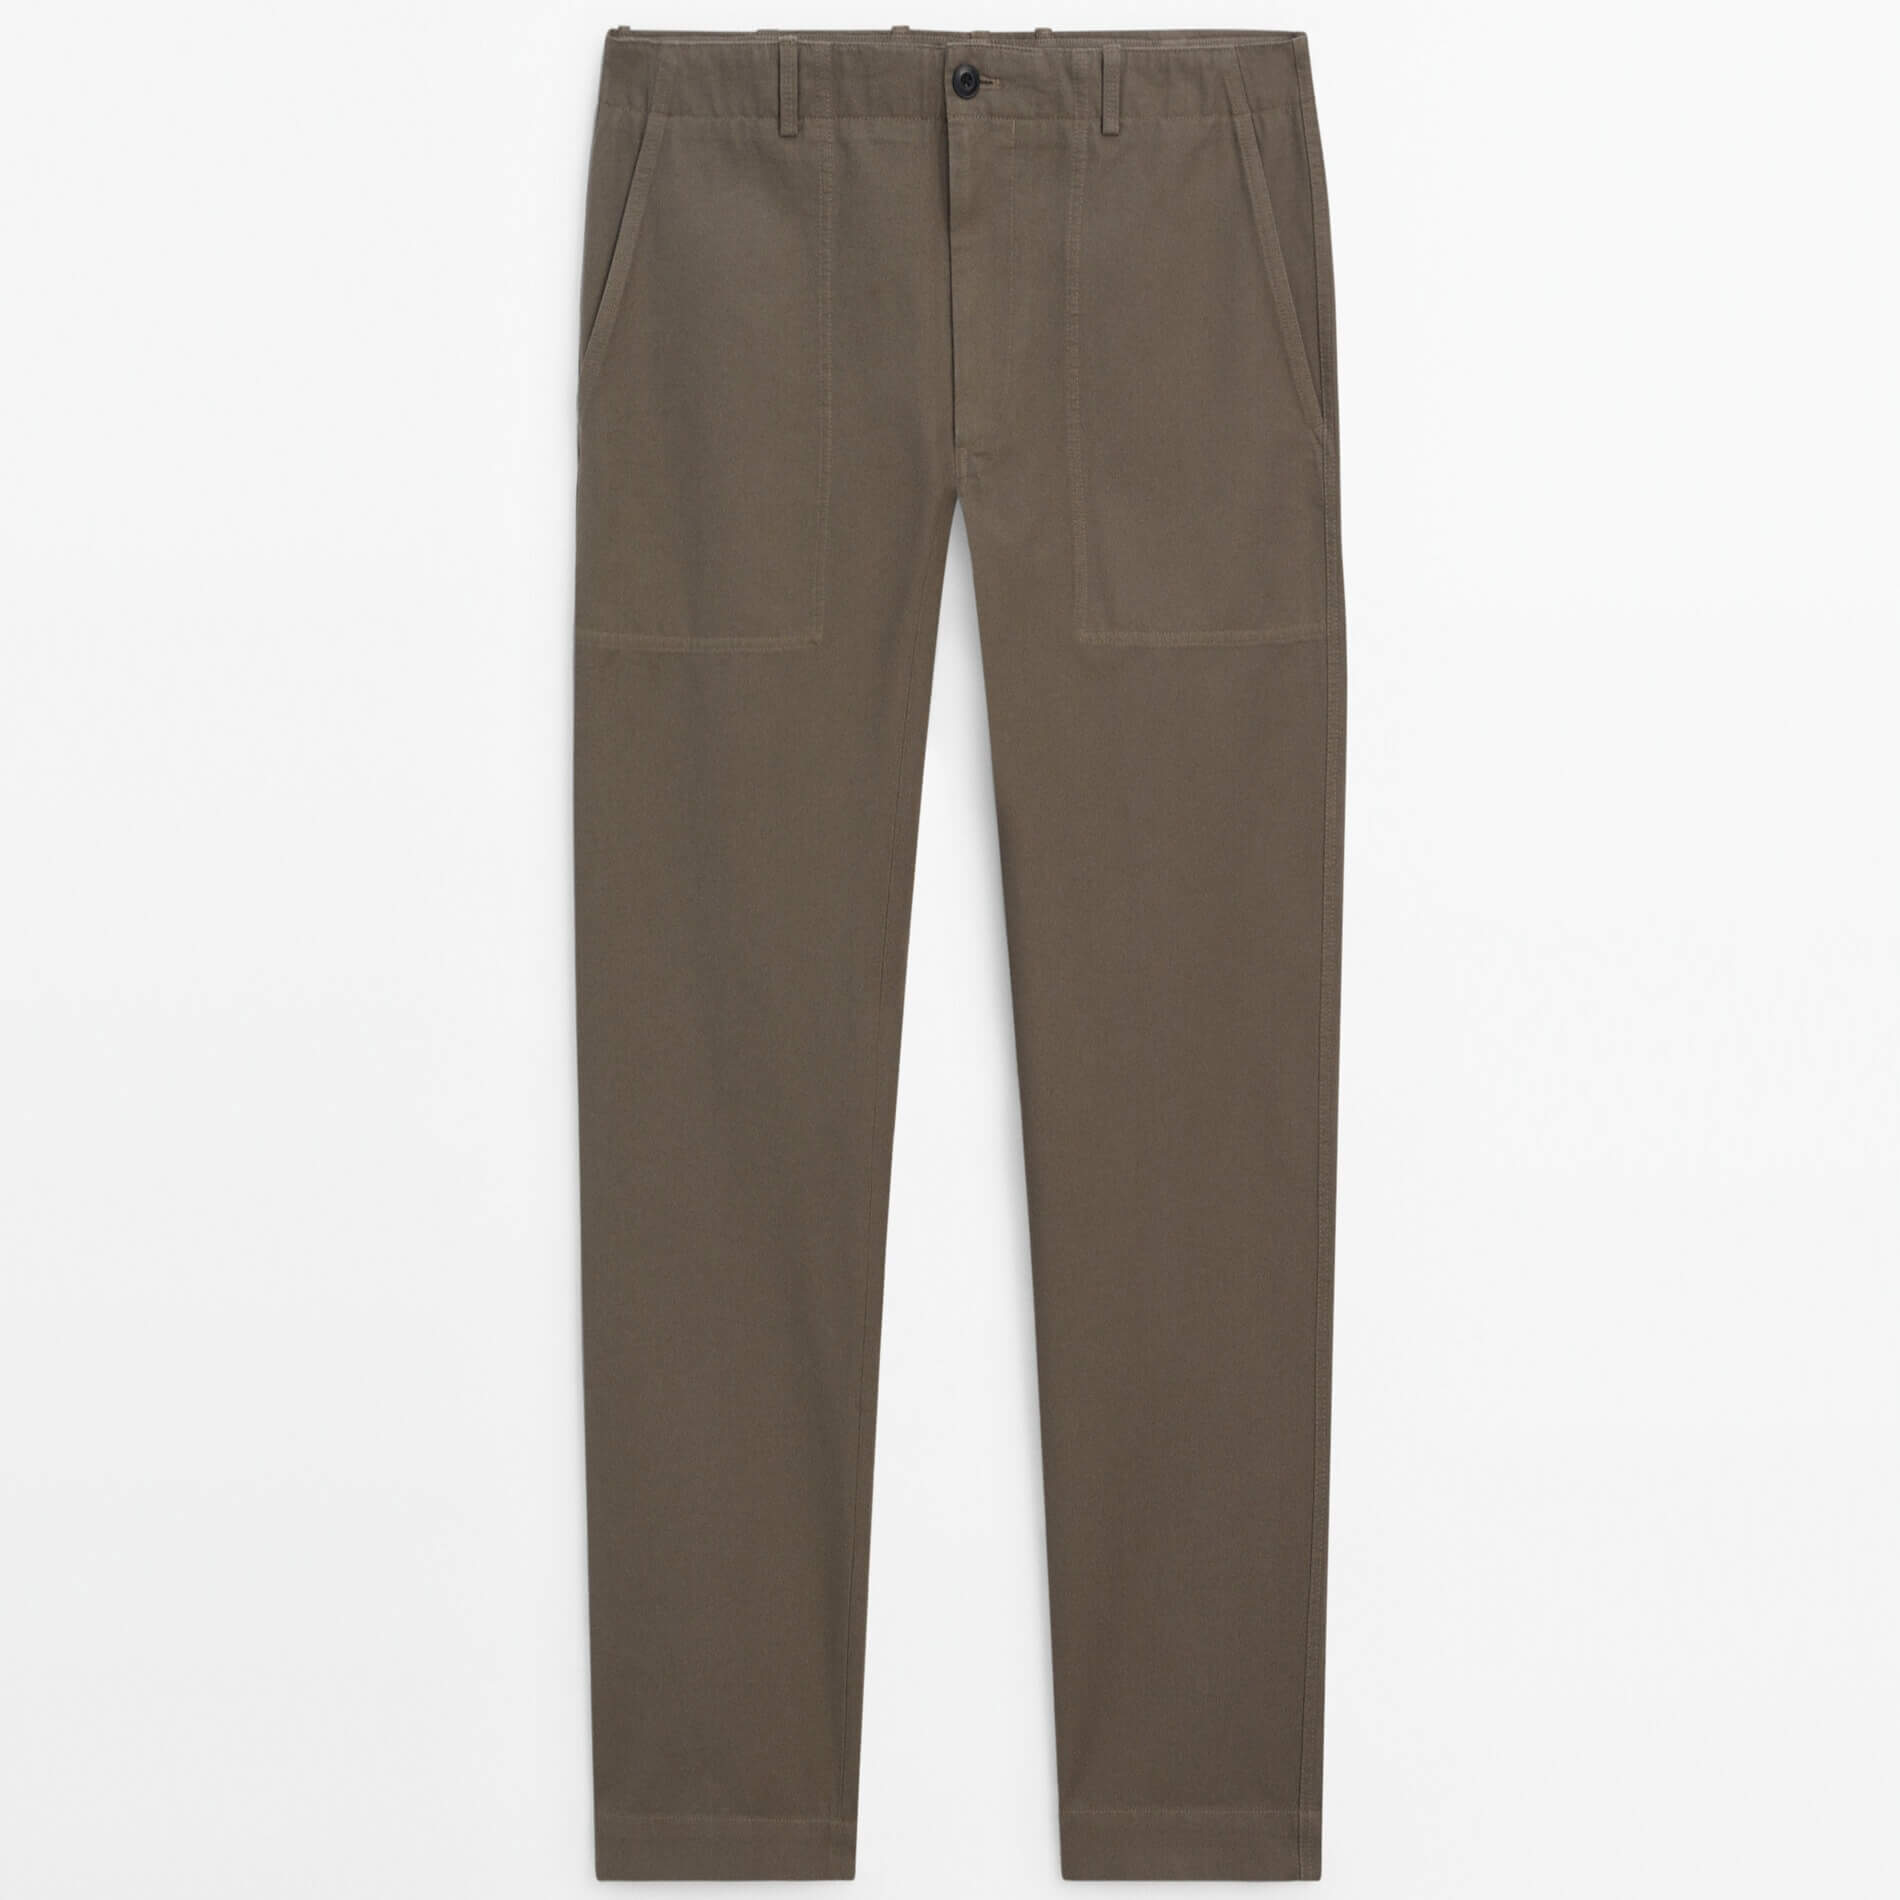 цена Брюки Massimo Dutti Relaxed Fit Canvas, хаки